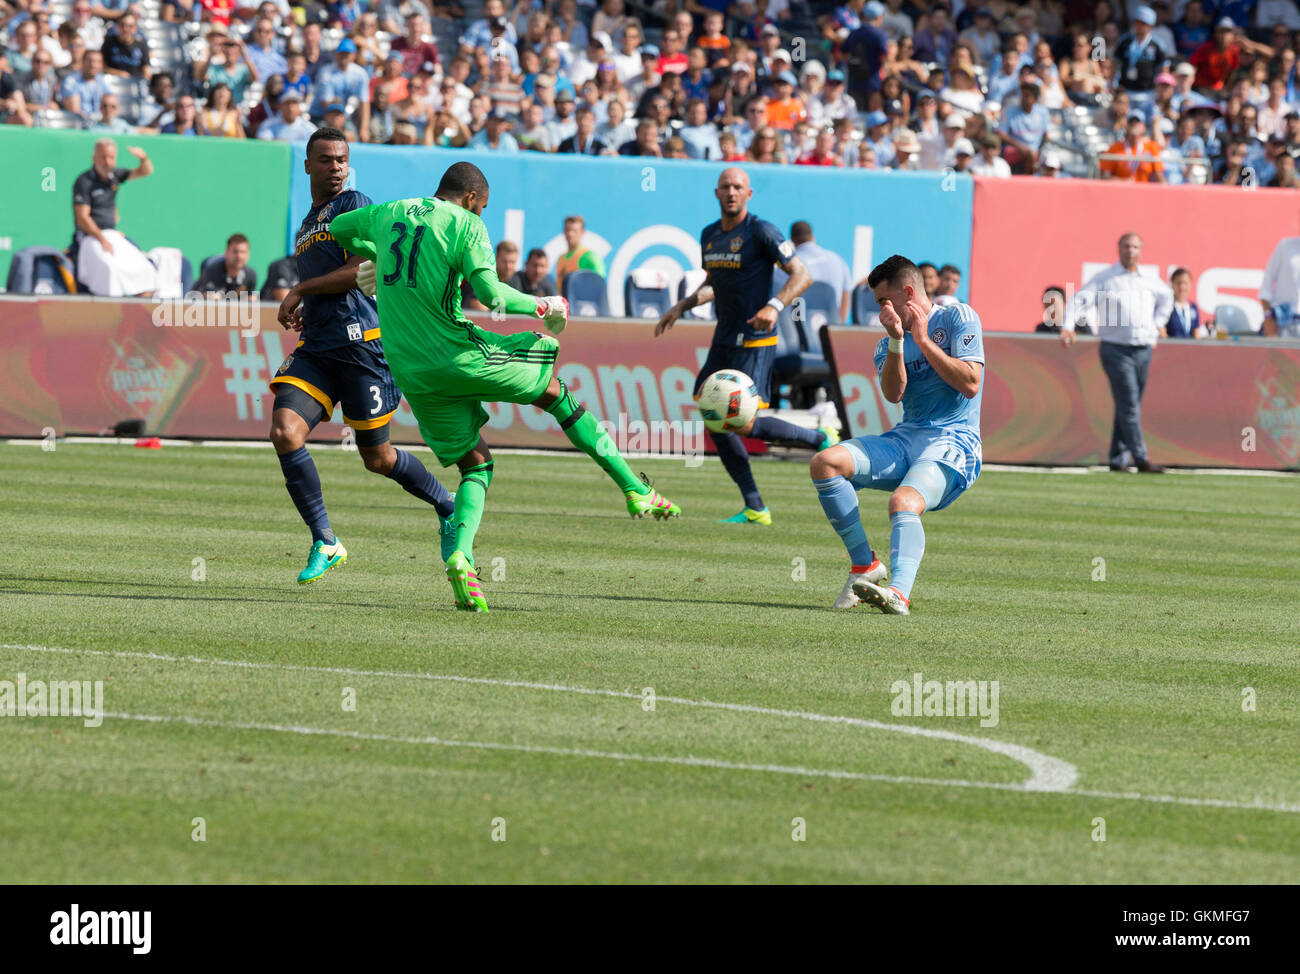 Yankee Stadium, New York, USA. 20th Aug, 2016. Goalkeeper Clement Diop (31) of LA Galaxy saves ball during MLS match against NYC FC on Yankees stadium NYC FC won 1 - 0 (Phjoto by Lev Radin/Pacific Press) Credit:  PACIFIC PRESS/Alamy Live News Stock Photo